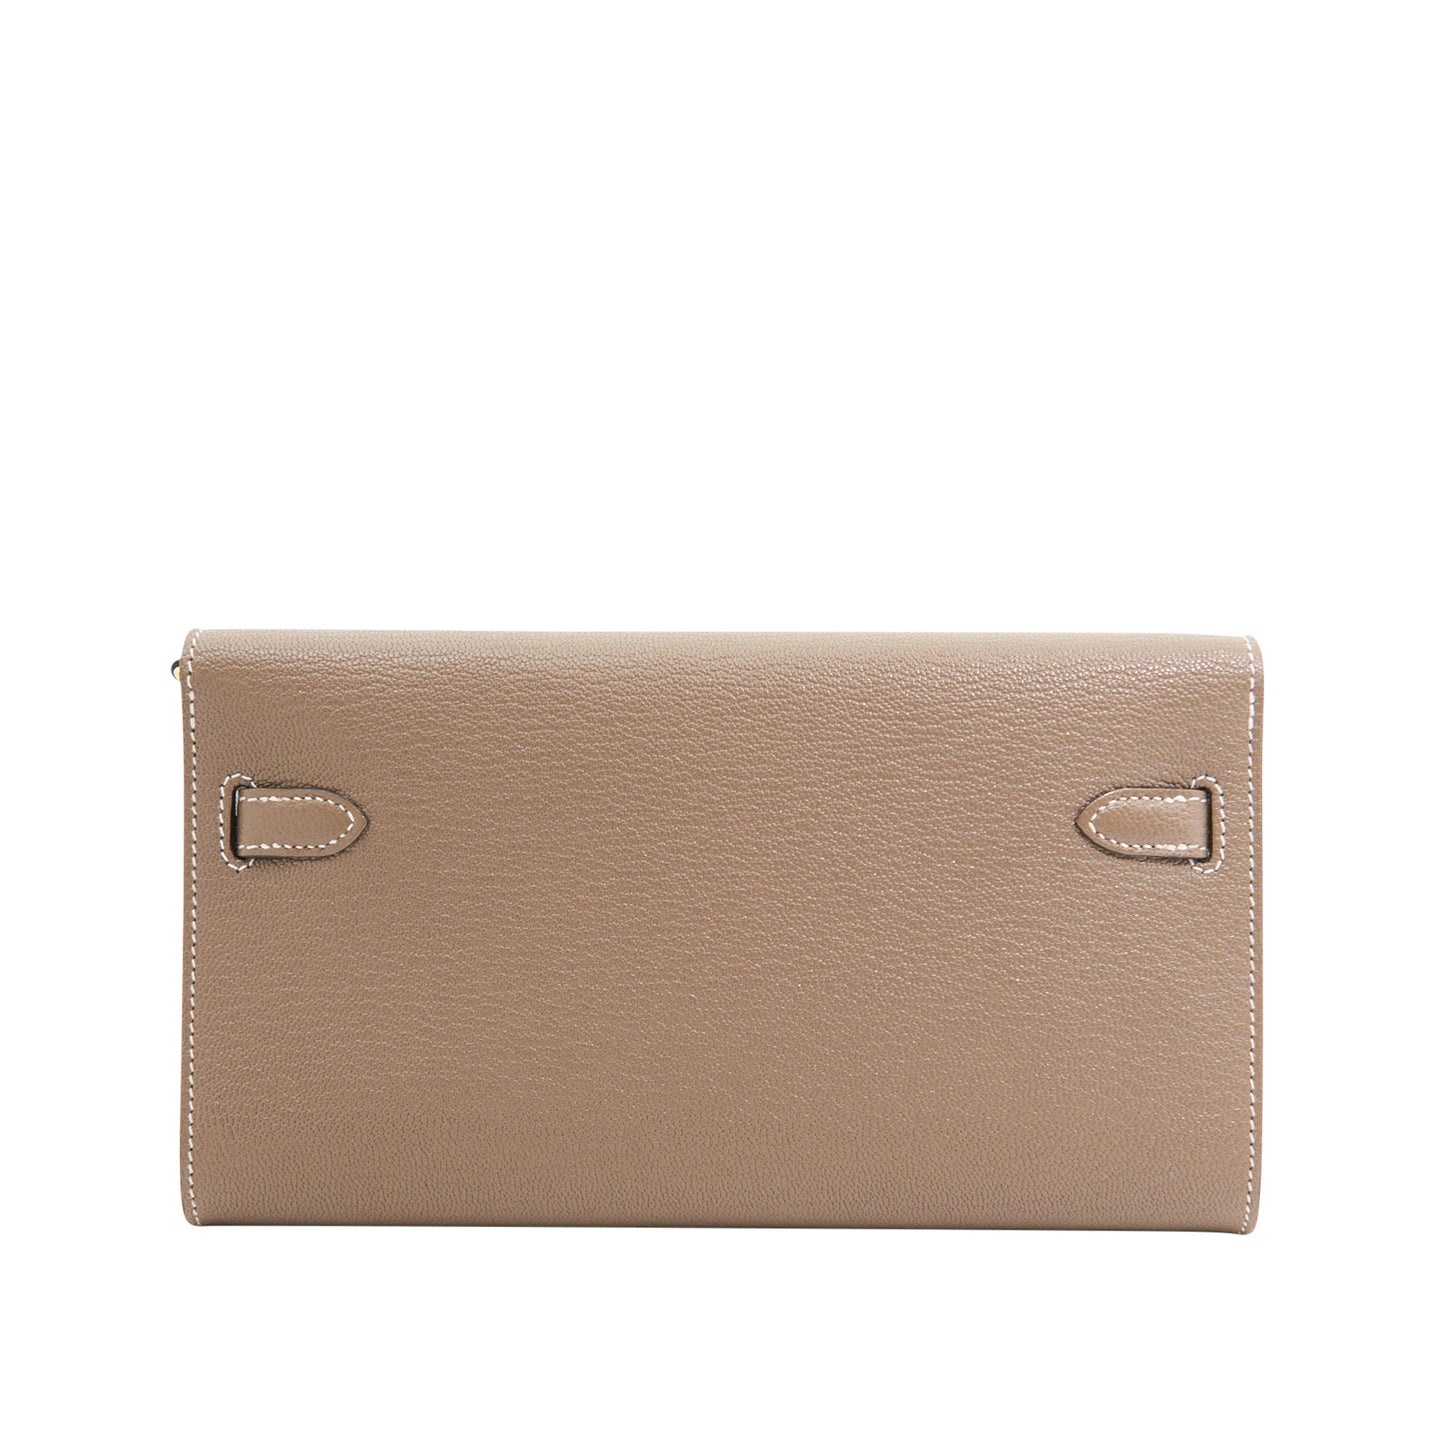 Hermes Togo Kelly to go Wallet in Etoupe GHW